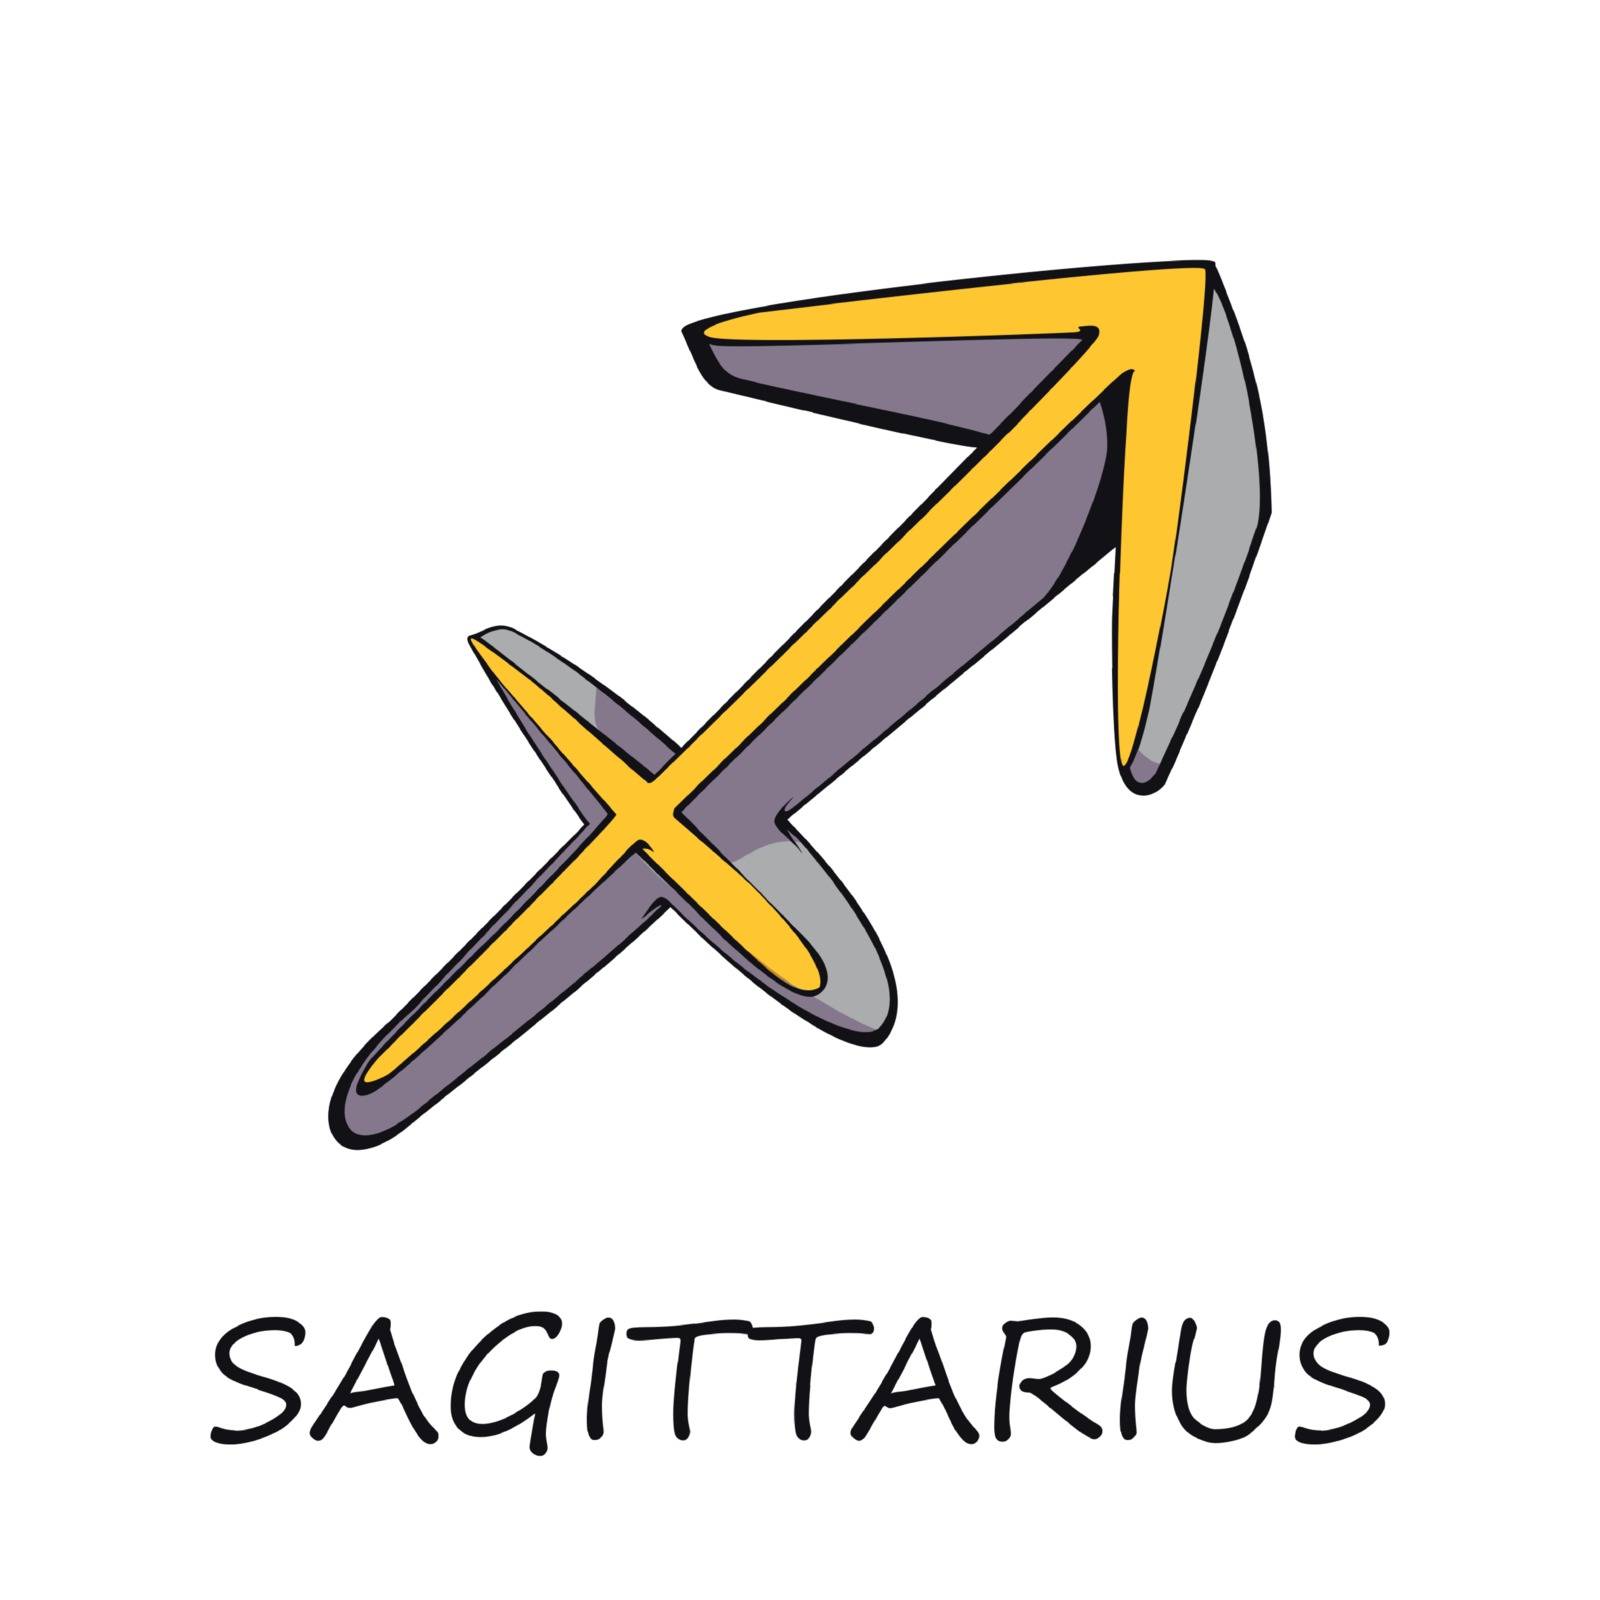 Sagittarius zodiac sign flat cartoon vector illustration. Celestial archer, fire horoscope symbol. Astrological monthly prediction object. Astrology chart yellow element. Isolated hand drawn item